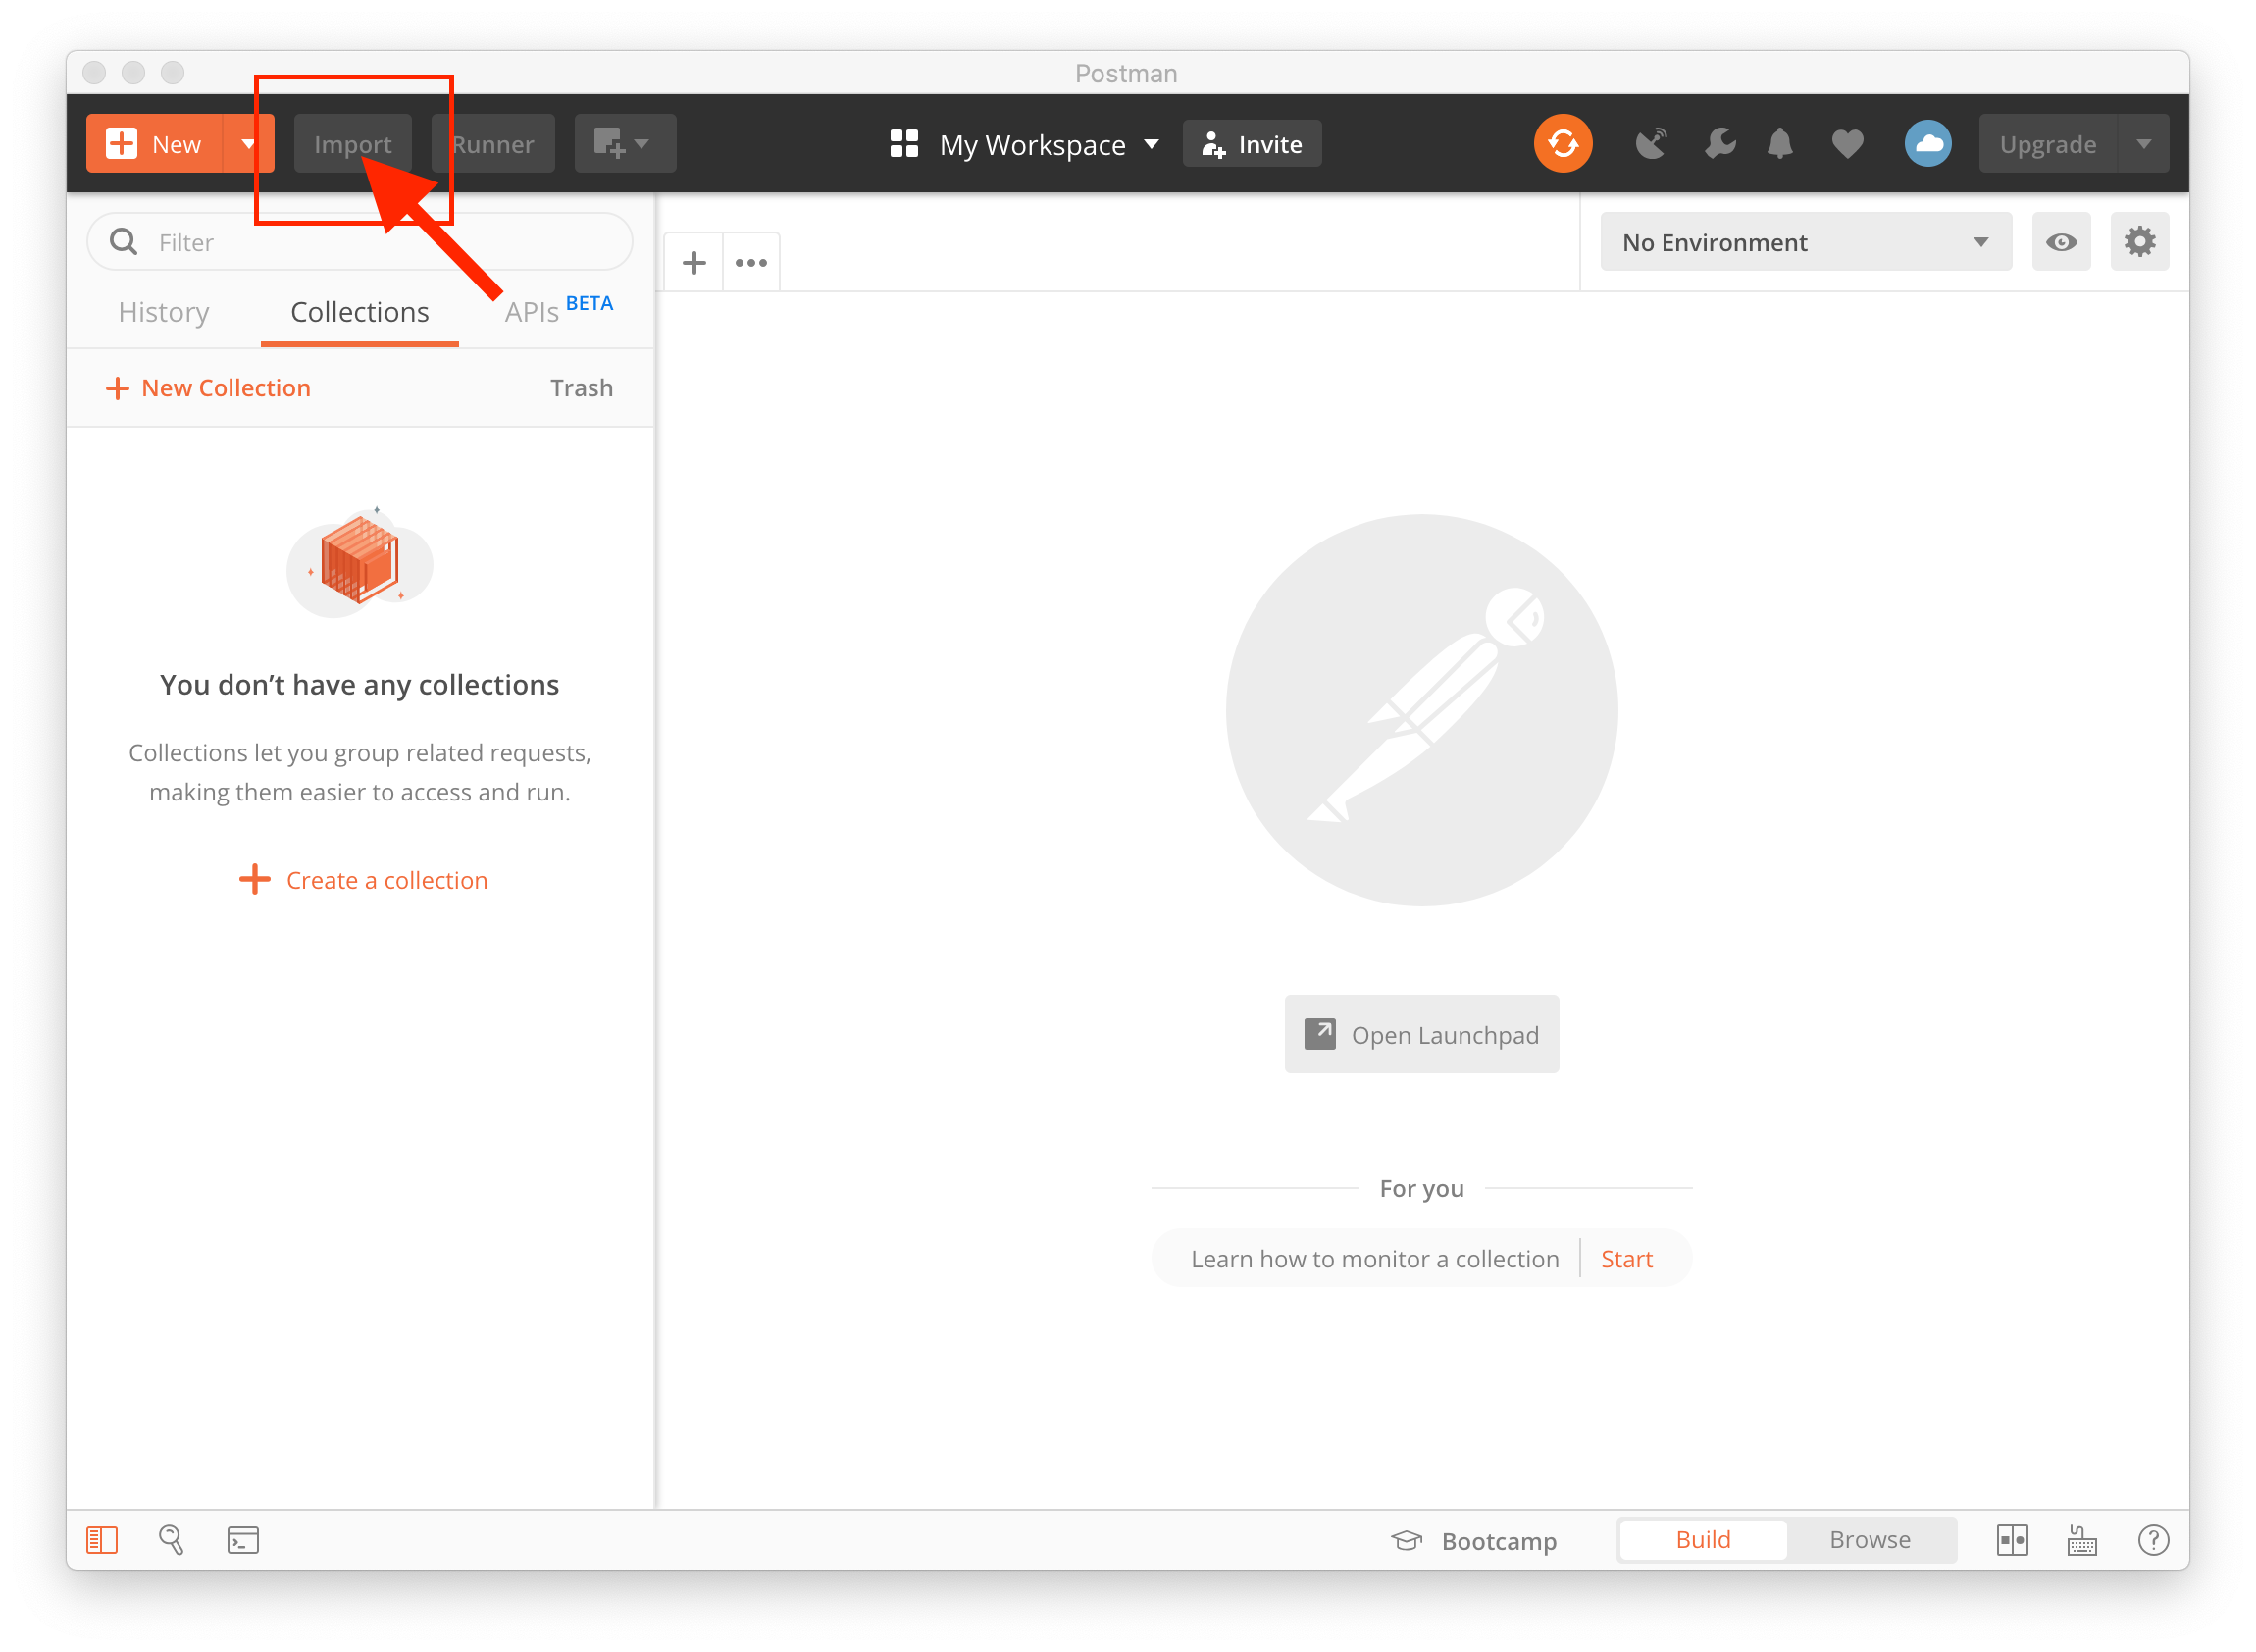 2. Start the Postman app and click `Import` up in the left top corner.